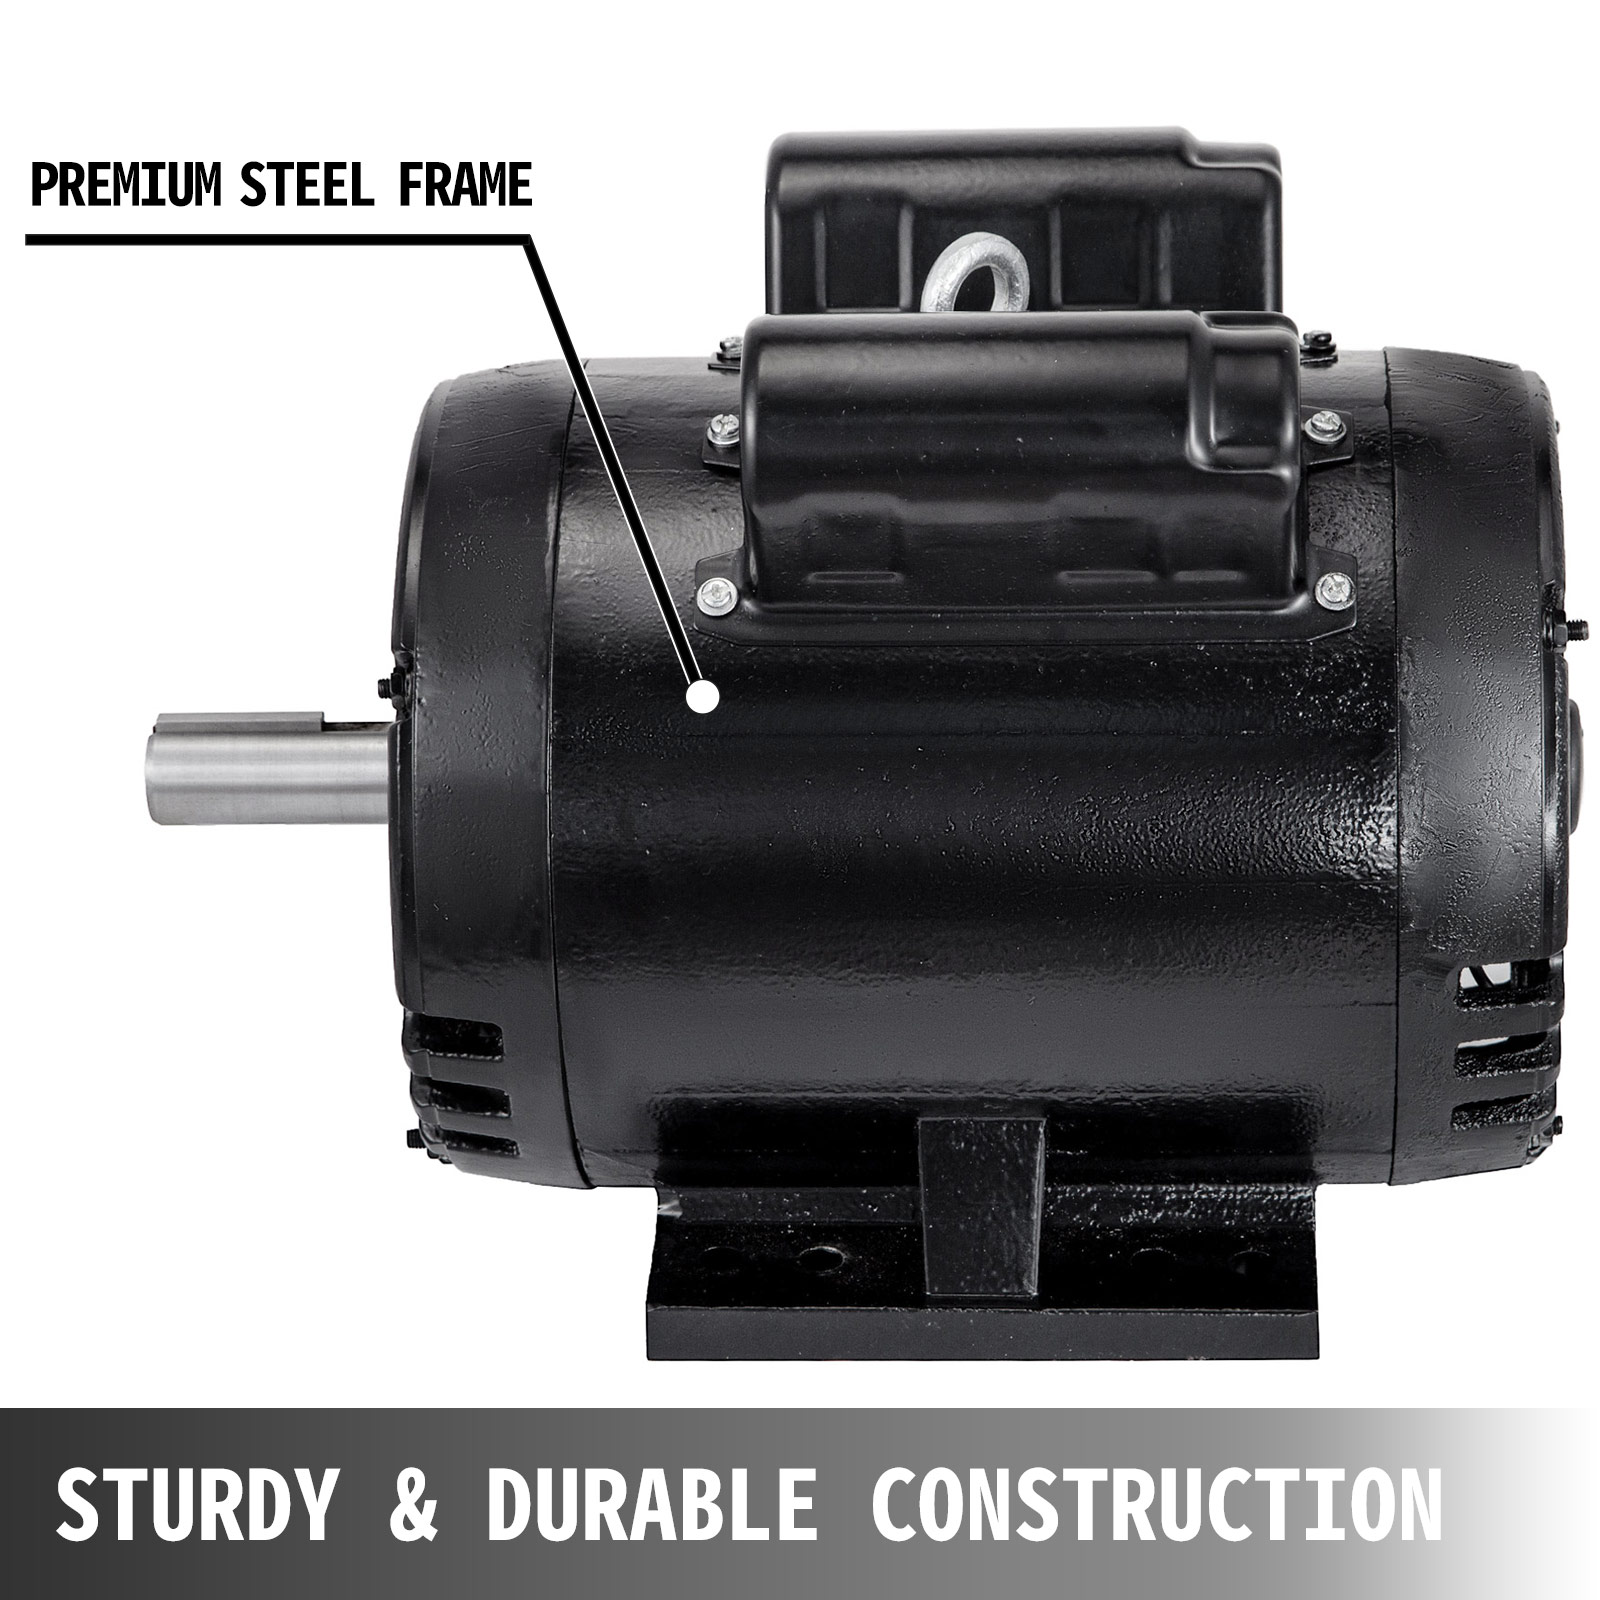 5HP Air Compressor Duty Electric Motor 184T Frame 1725 RPM 208-230V Single Phase 